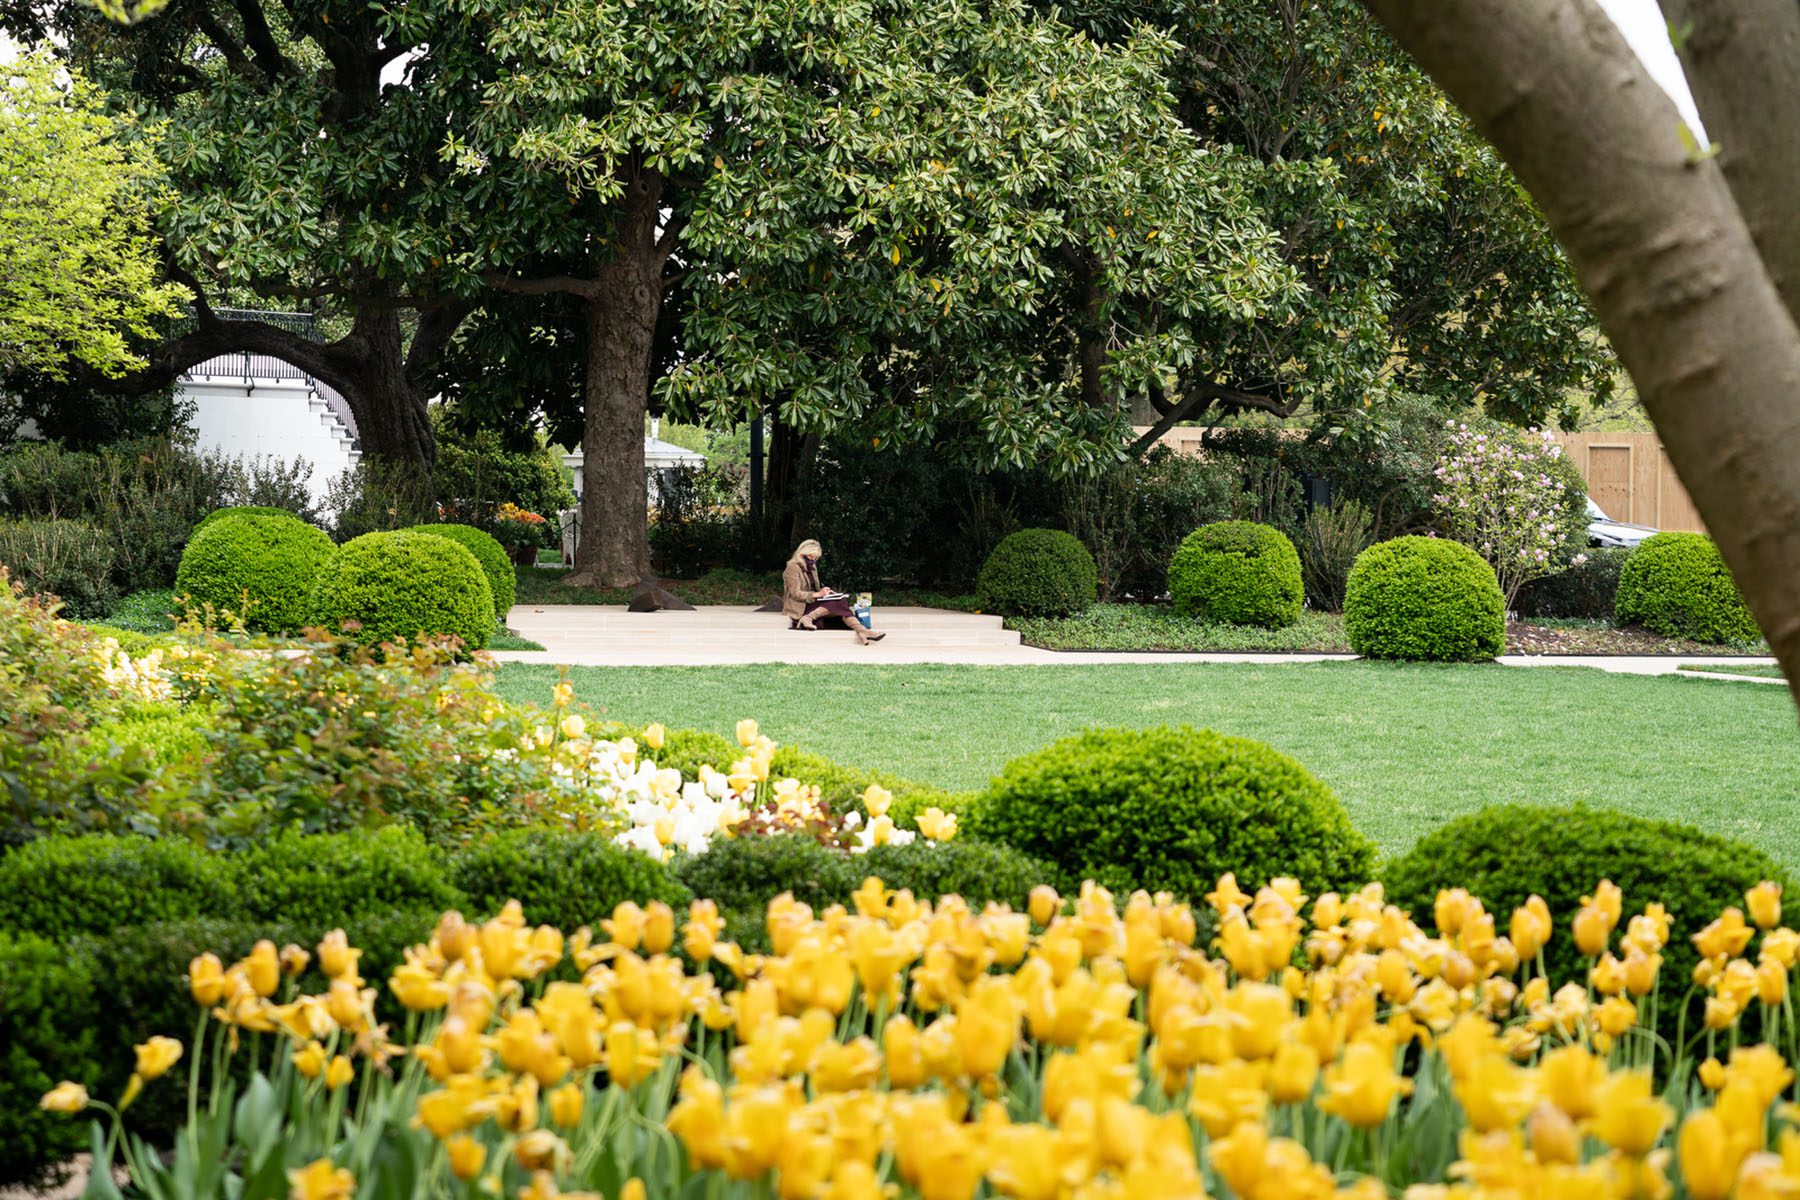 Jill Biden sits on a stair while she grades papers in the Rose Garden at the White House.